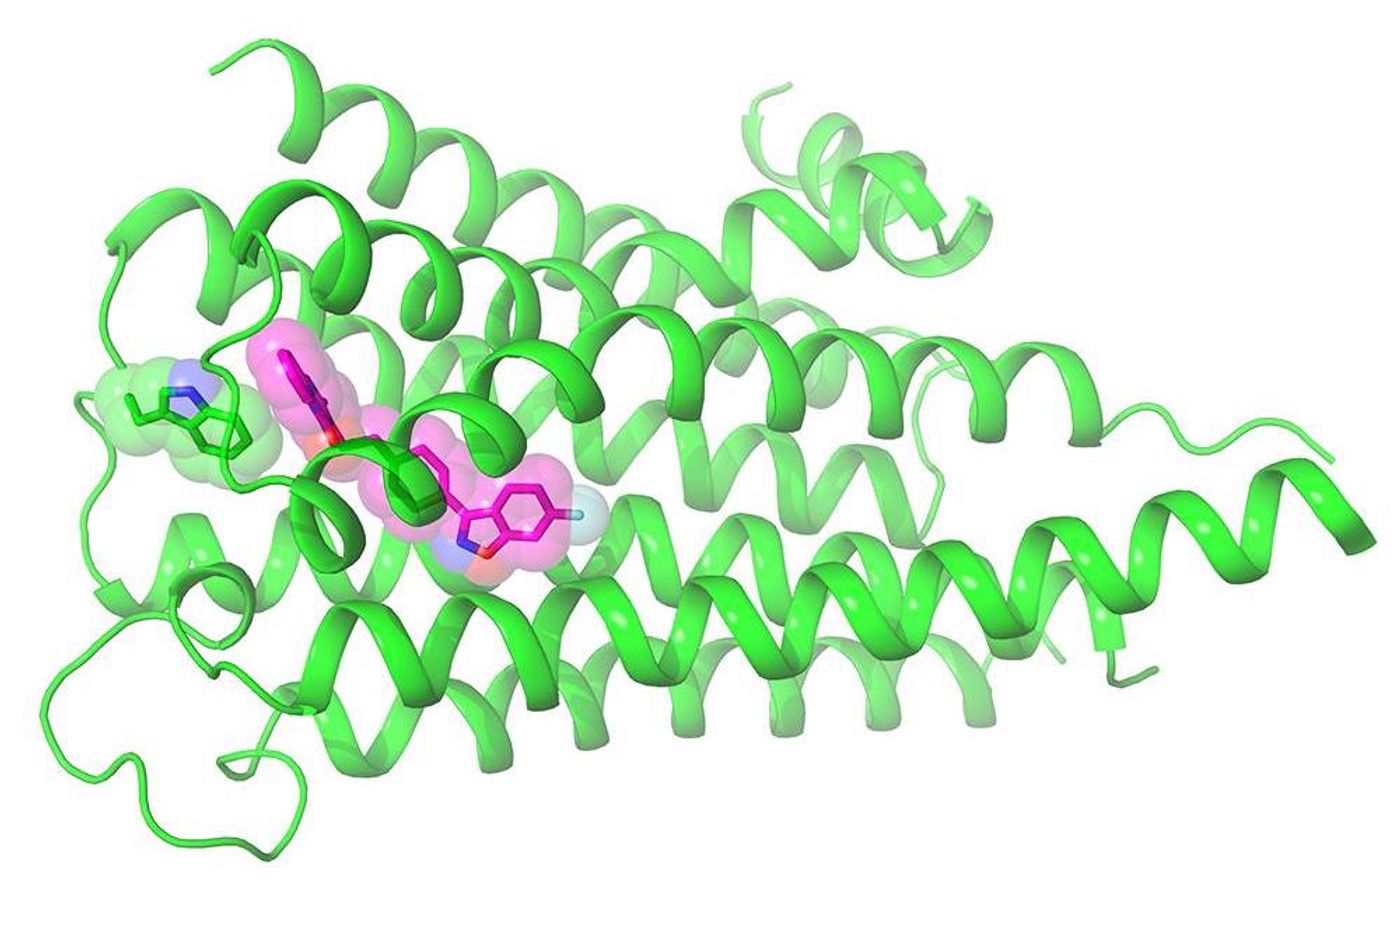 Widely-prescribed antipsychotic drug risperidone (purple) is shown interacting with its primary human brain target, the D2 dopamine receptor (green). Discovery of this molecular structure holds promise for rational design of more selective drugs, say researchers. / Credit: Roth Lab, UNC